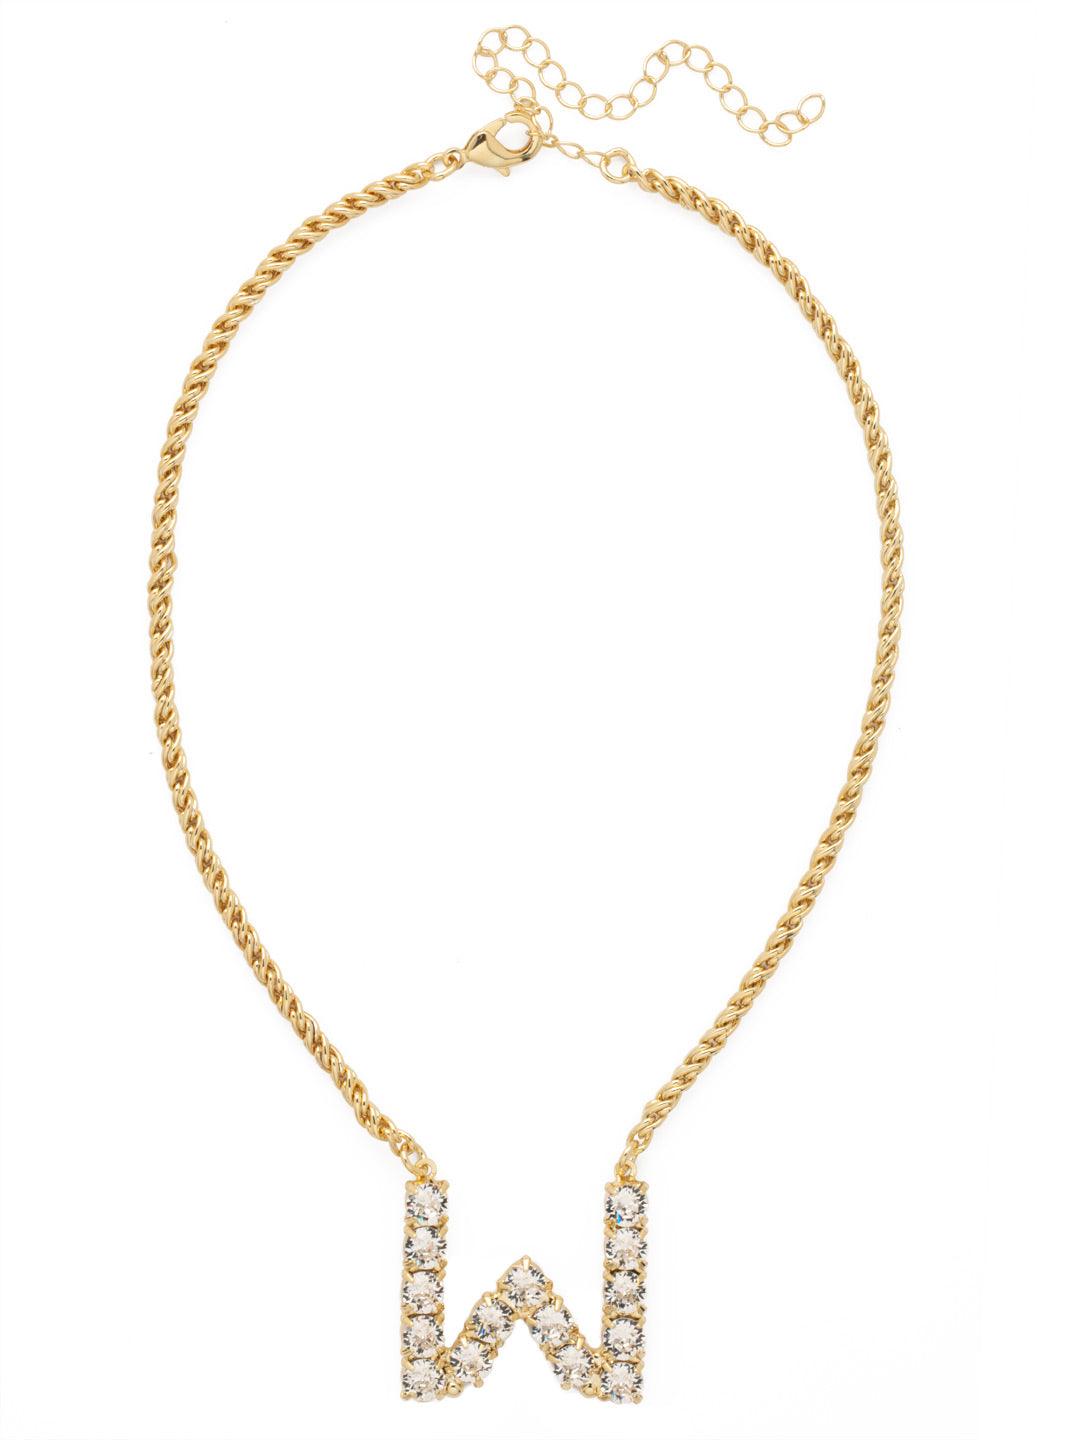 W Initial Rope Pendant Necklace - NFK42BGCRY - <p>The Initial Rope Pendant Necklace features a crystal encrusted metal monogram pendant on an adjustable rope chain, secured with a lobster claw clasp. From Sorrelli's Crystal collection in our Bright Gold-tone finish.</p>